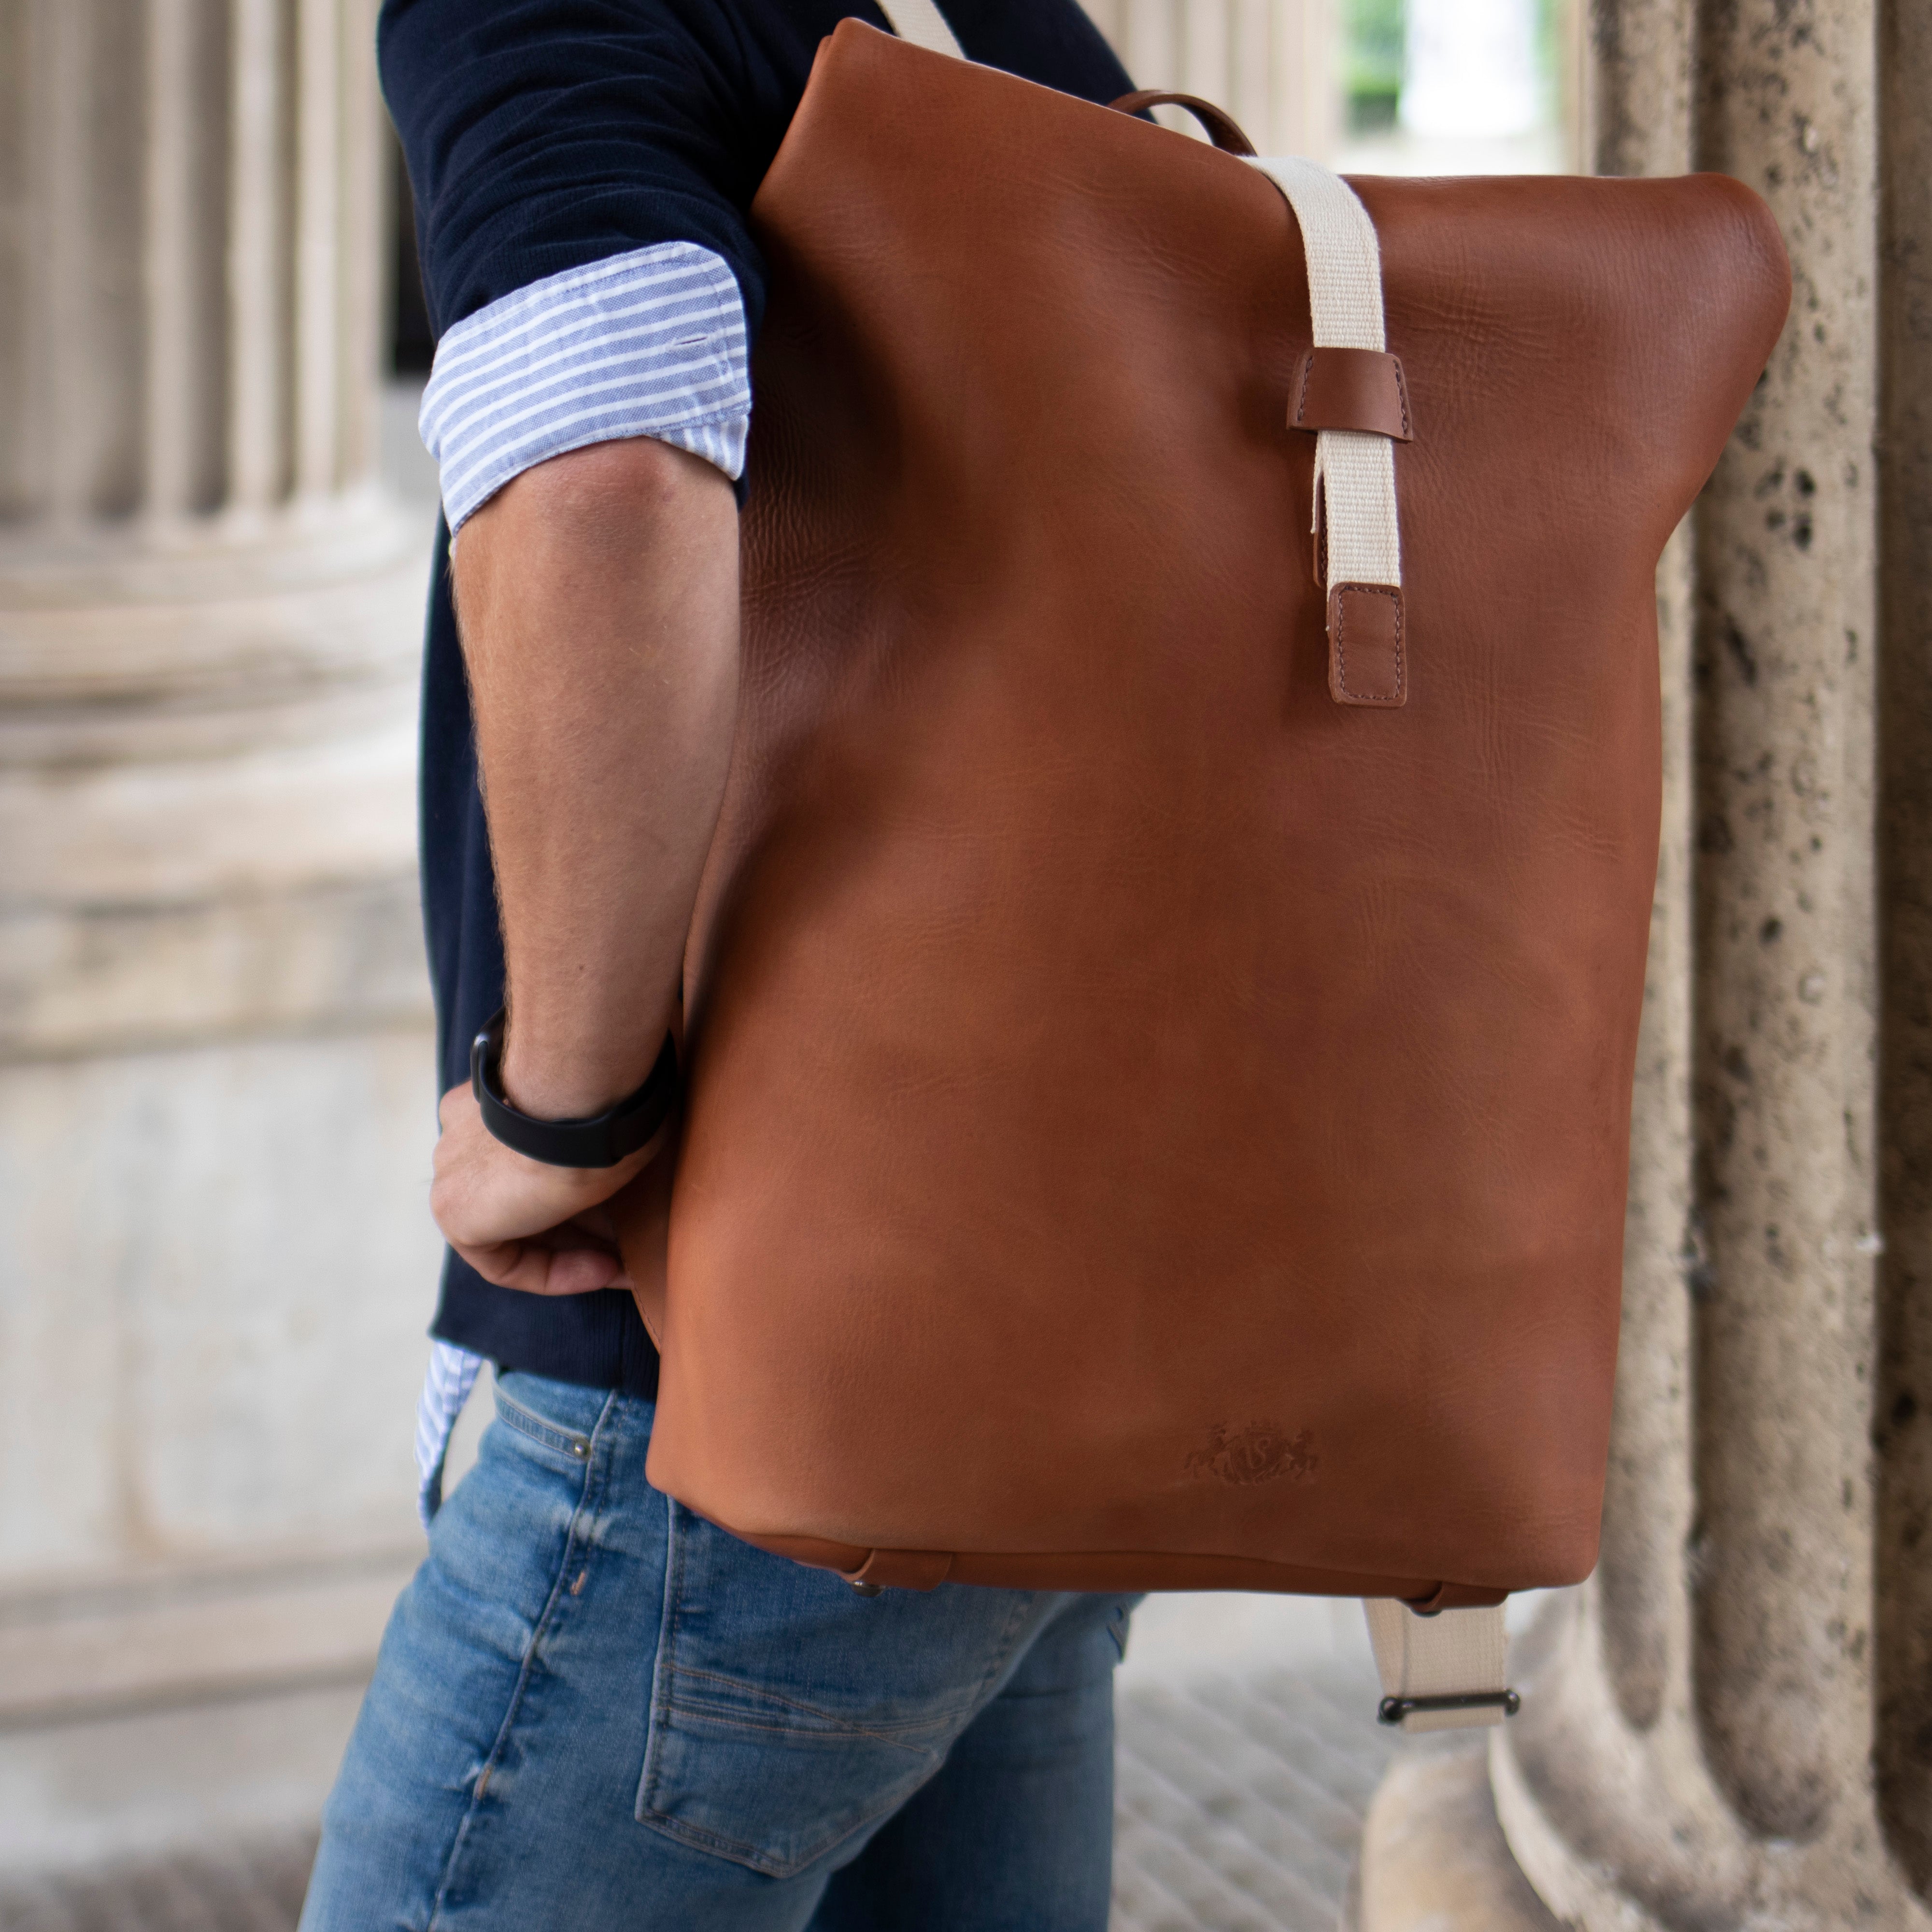 Rolltop backpack DAMIAN smooth leather brown